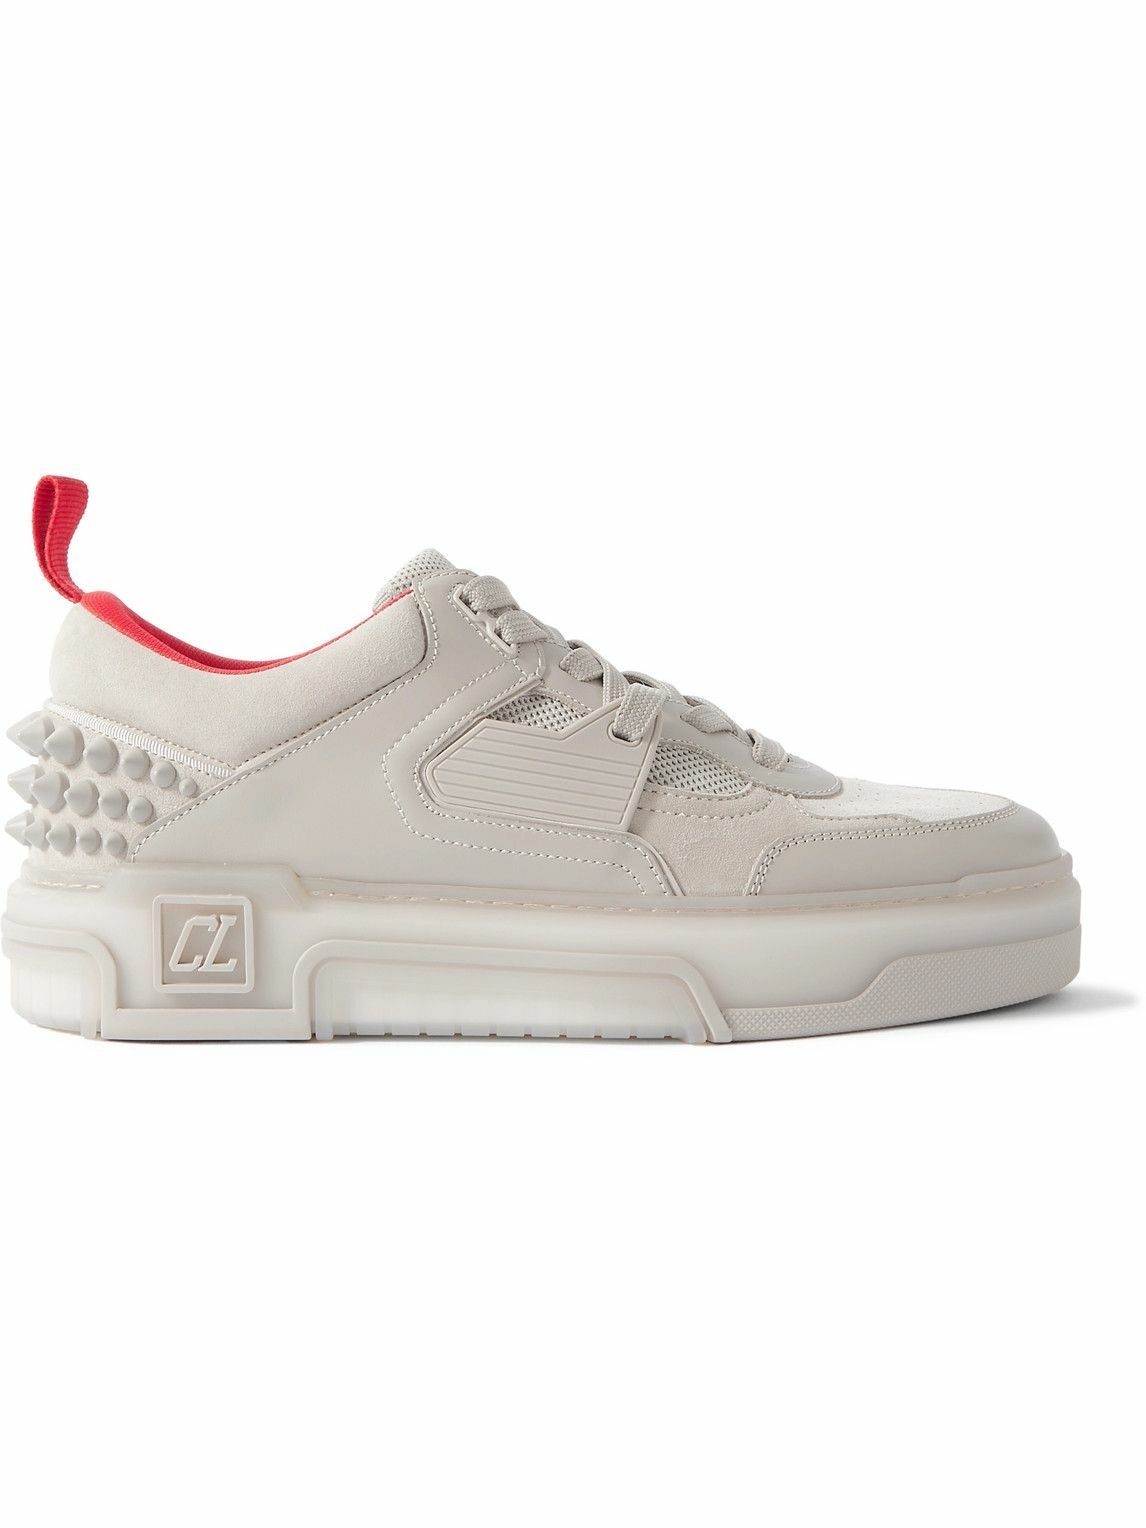 Photo: Christian Louboutin - Astroloubi Spiked Leather, Suede and Mesh Sneakers - Neutrals